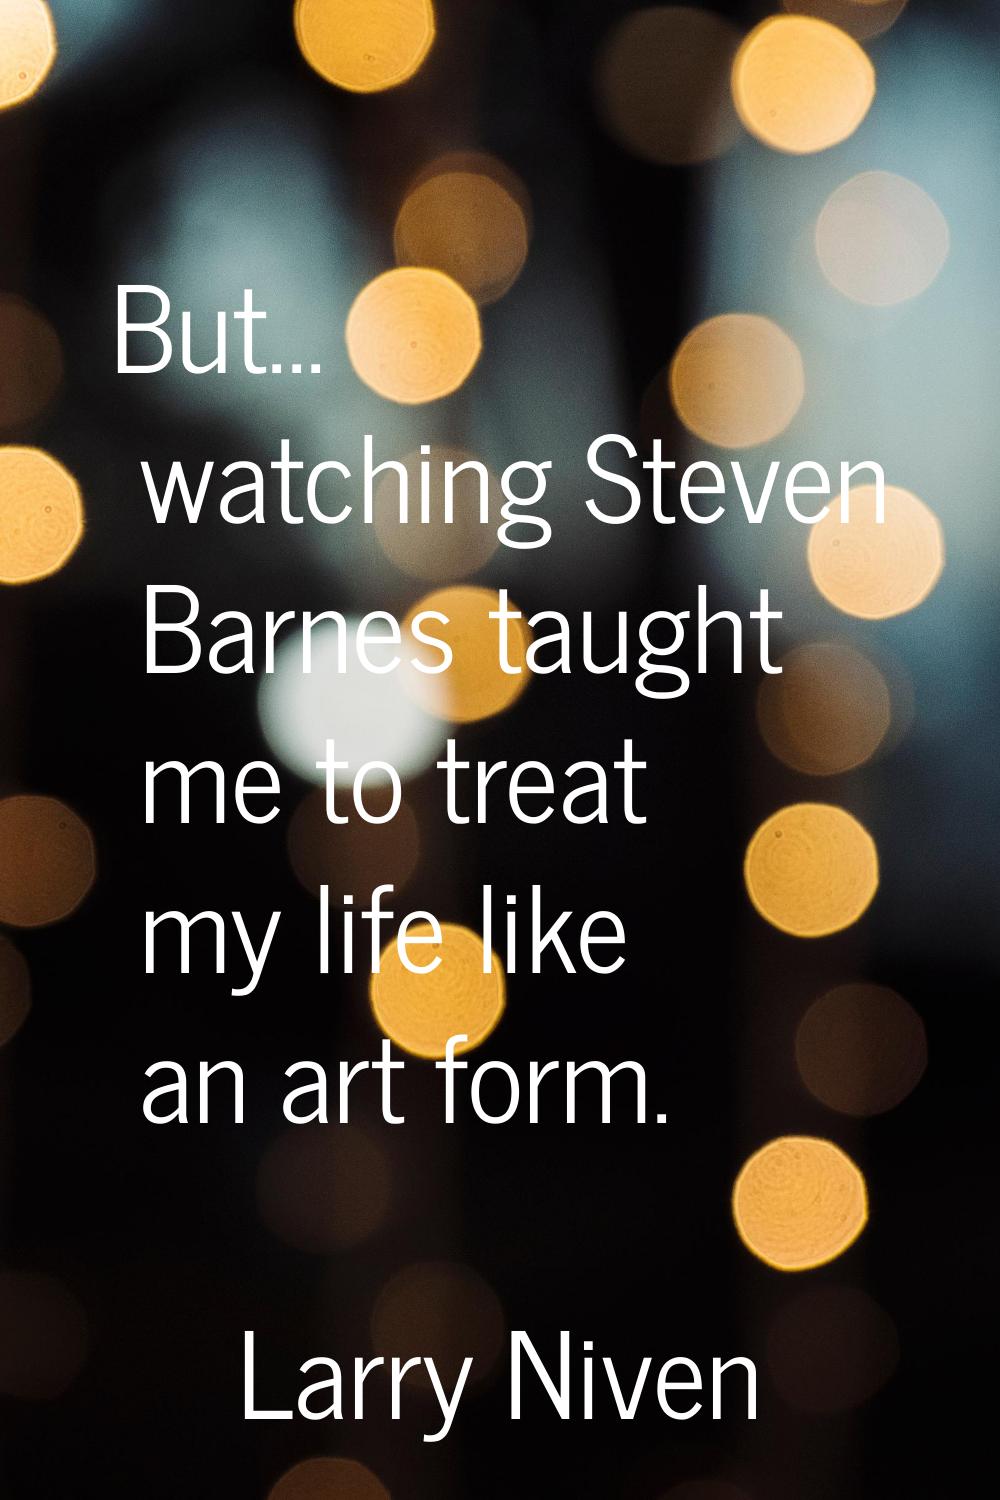 But... watching Steven Barnes taught me to treat my life like an art form.